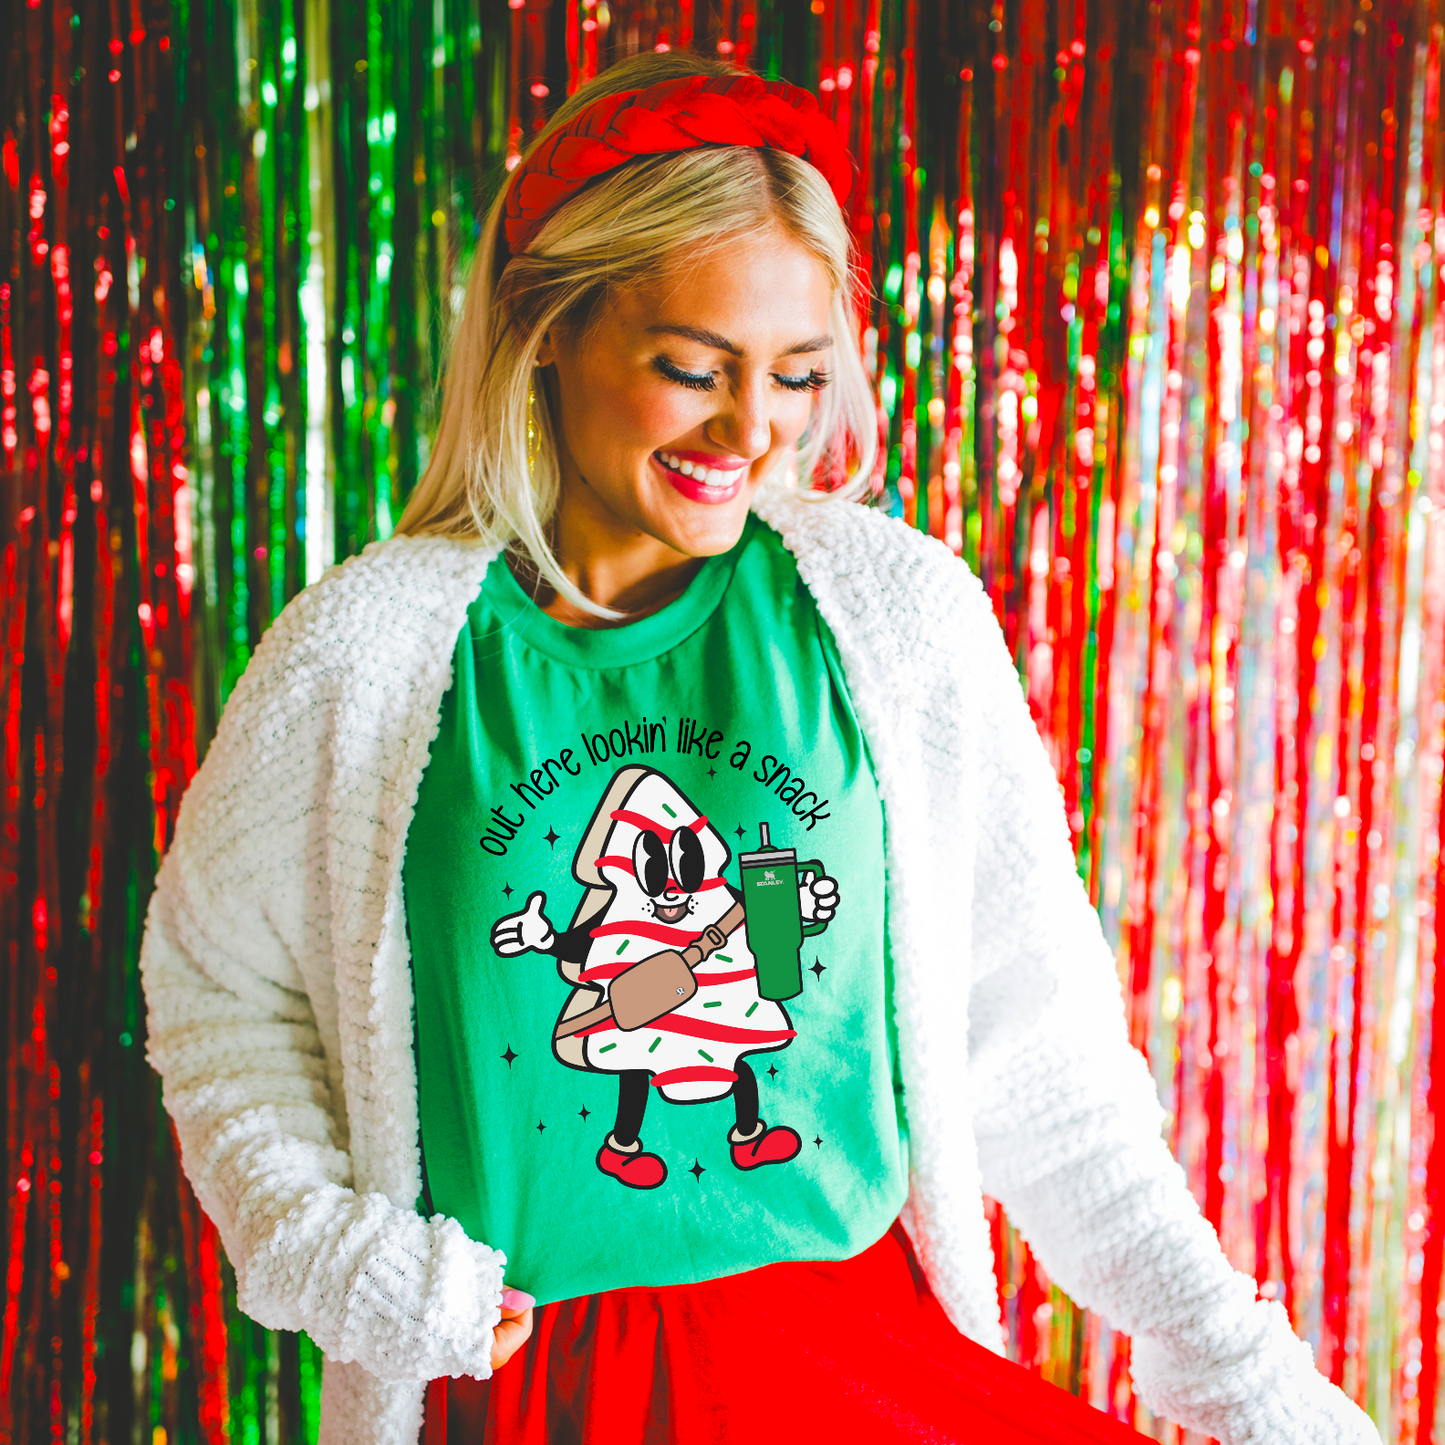 Out Here Looking Like A Snack Christmas Gildan Graphic Tee